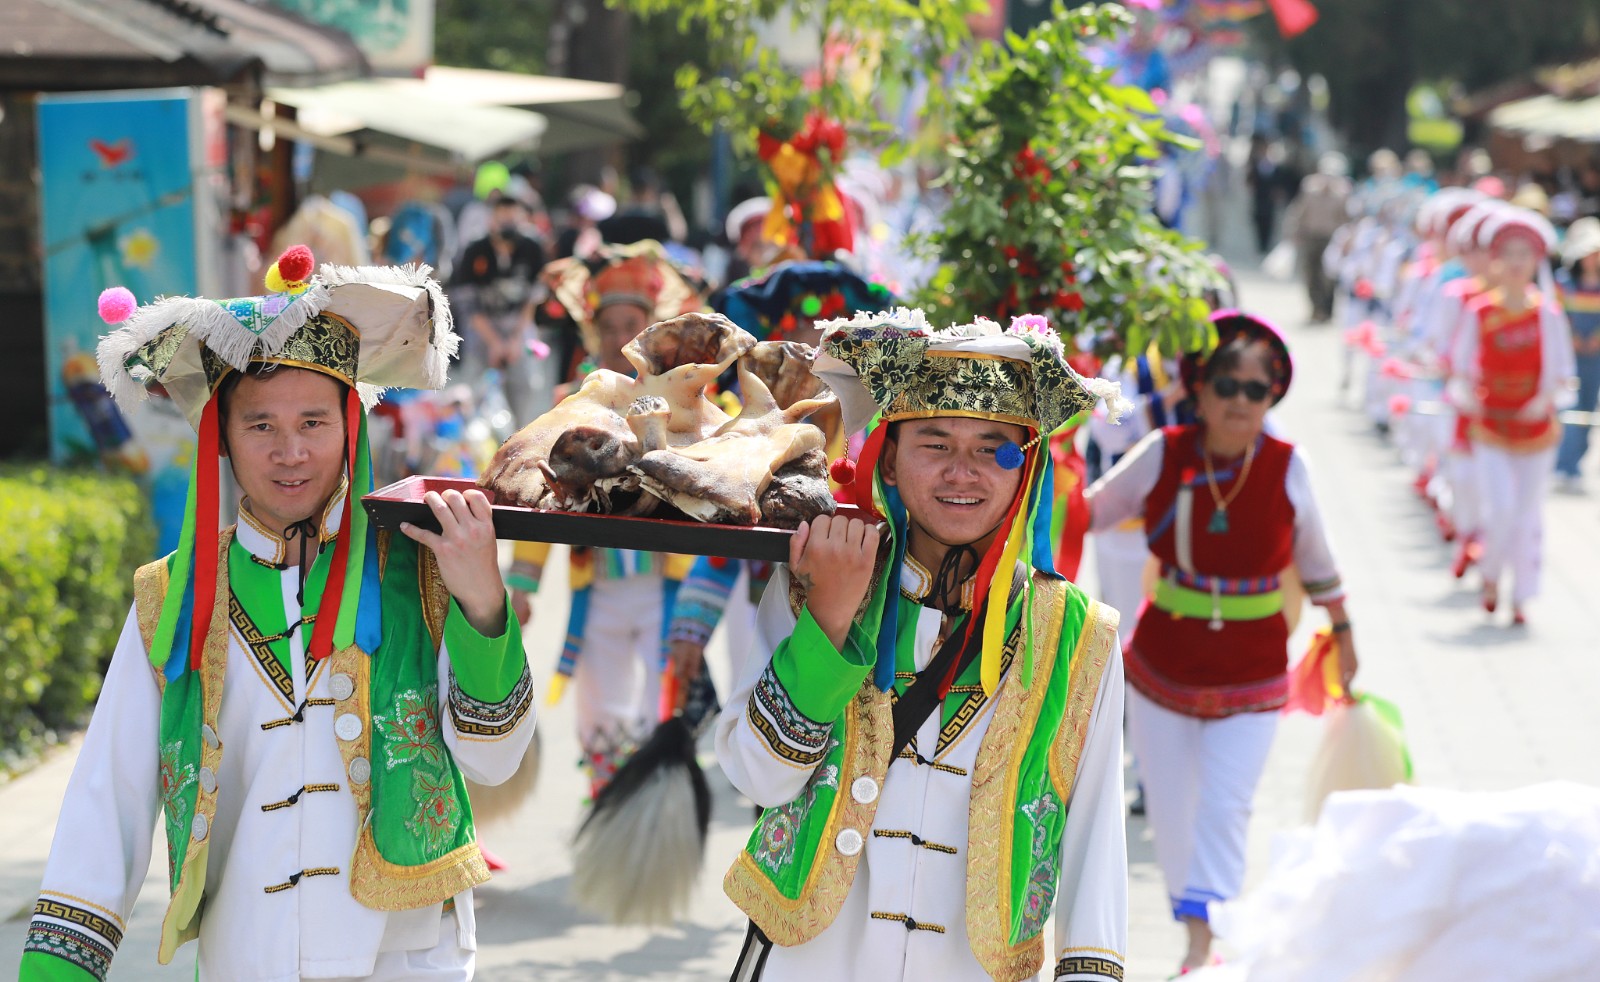 A file photo shows people from the Bai ethnic group dressed in traditional folk costumes taking part in Raosanling celebrations in Kunming, Yunnan Province. /CFP